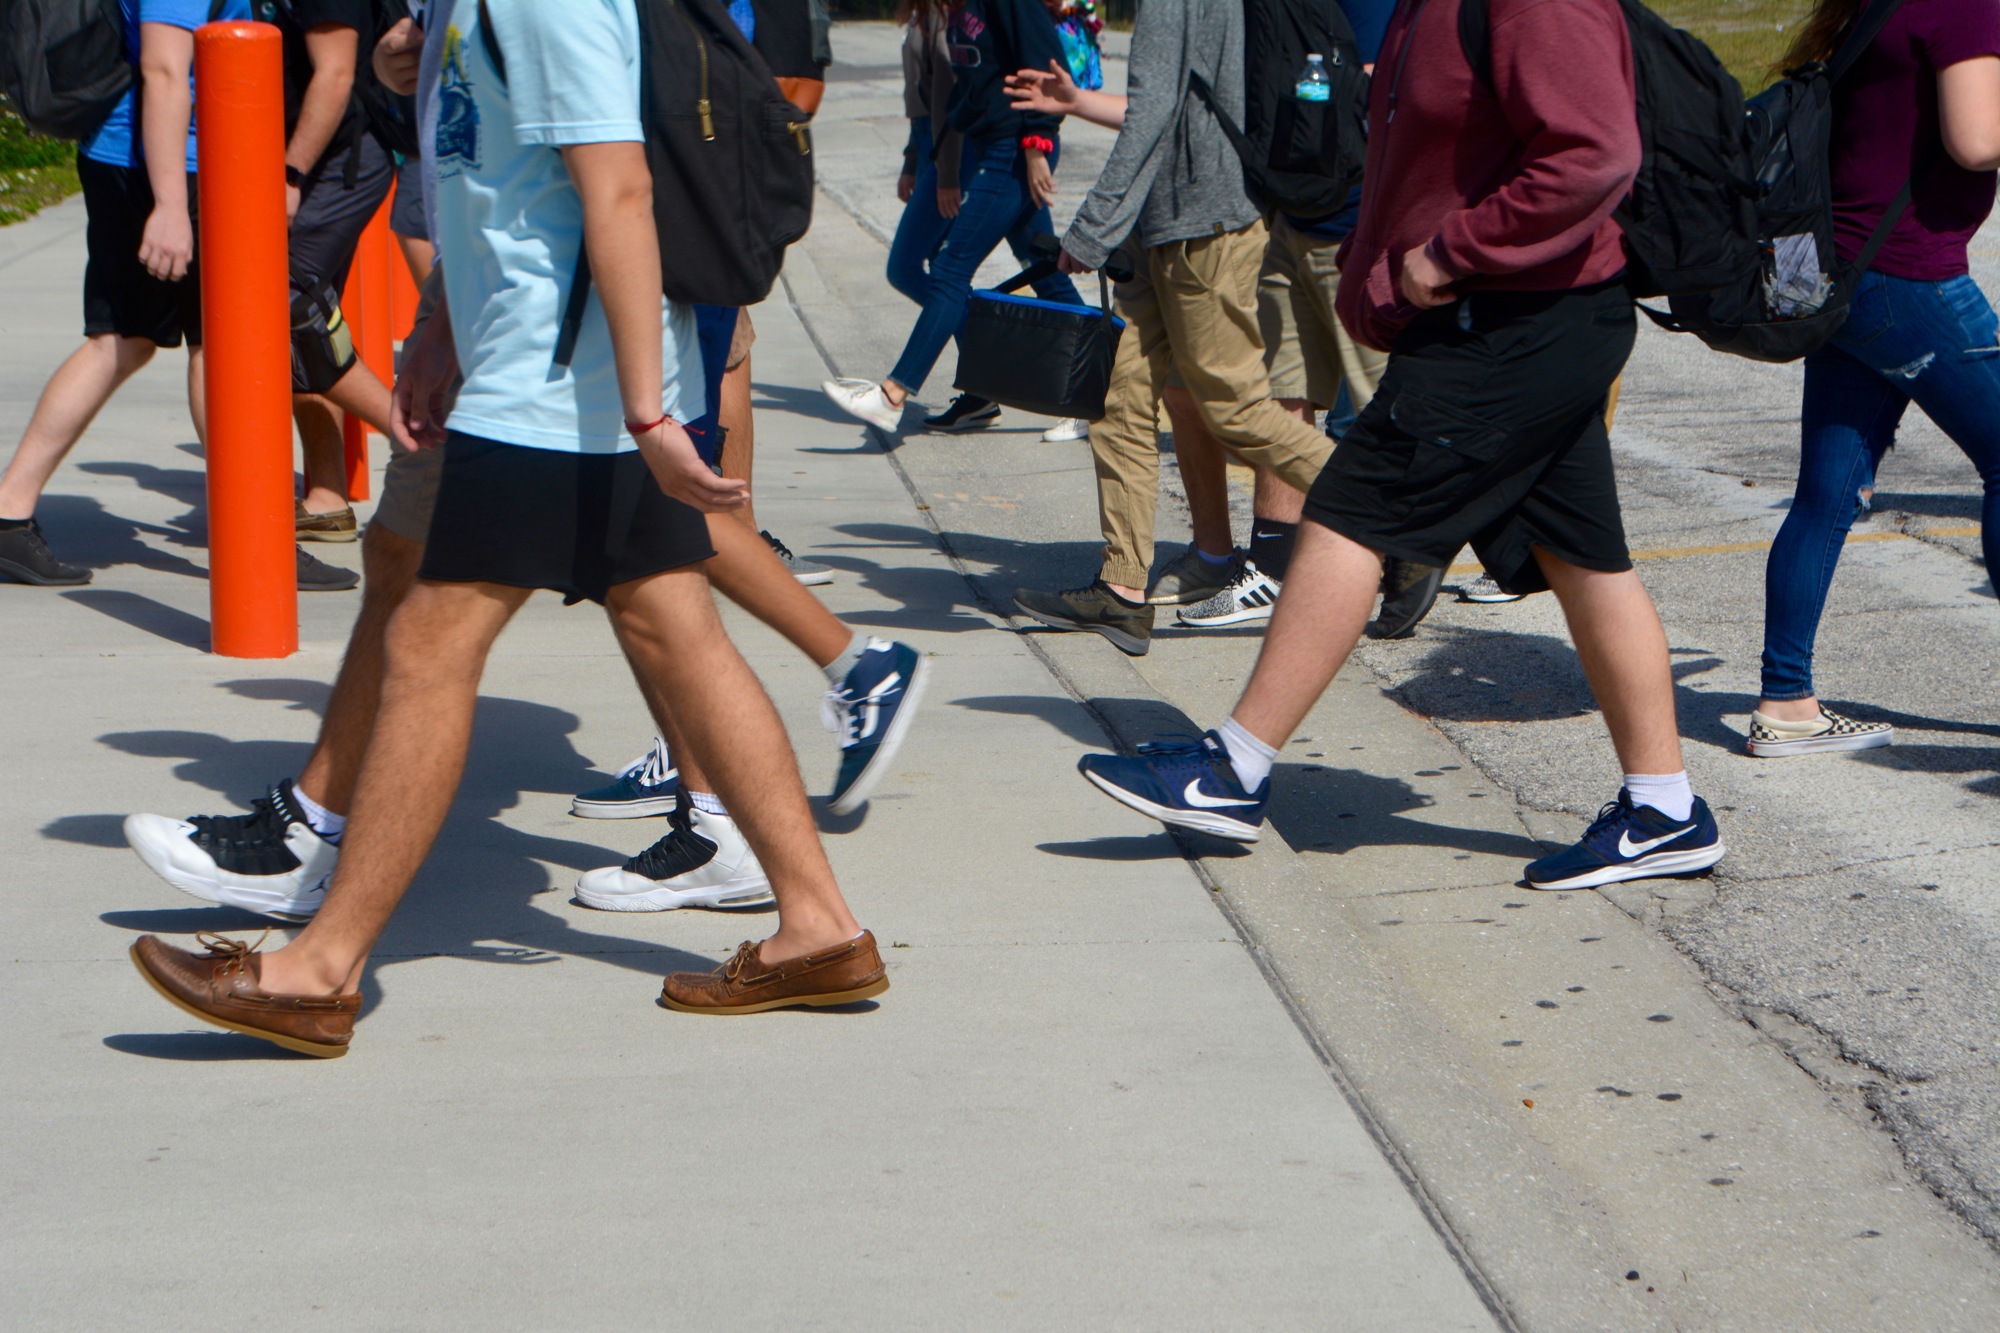 Sarasota High School students cross School Avenue, which bisects their campus.